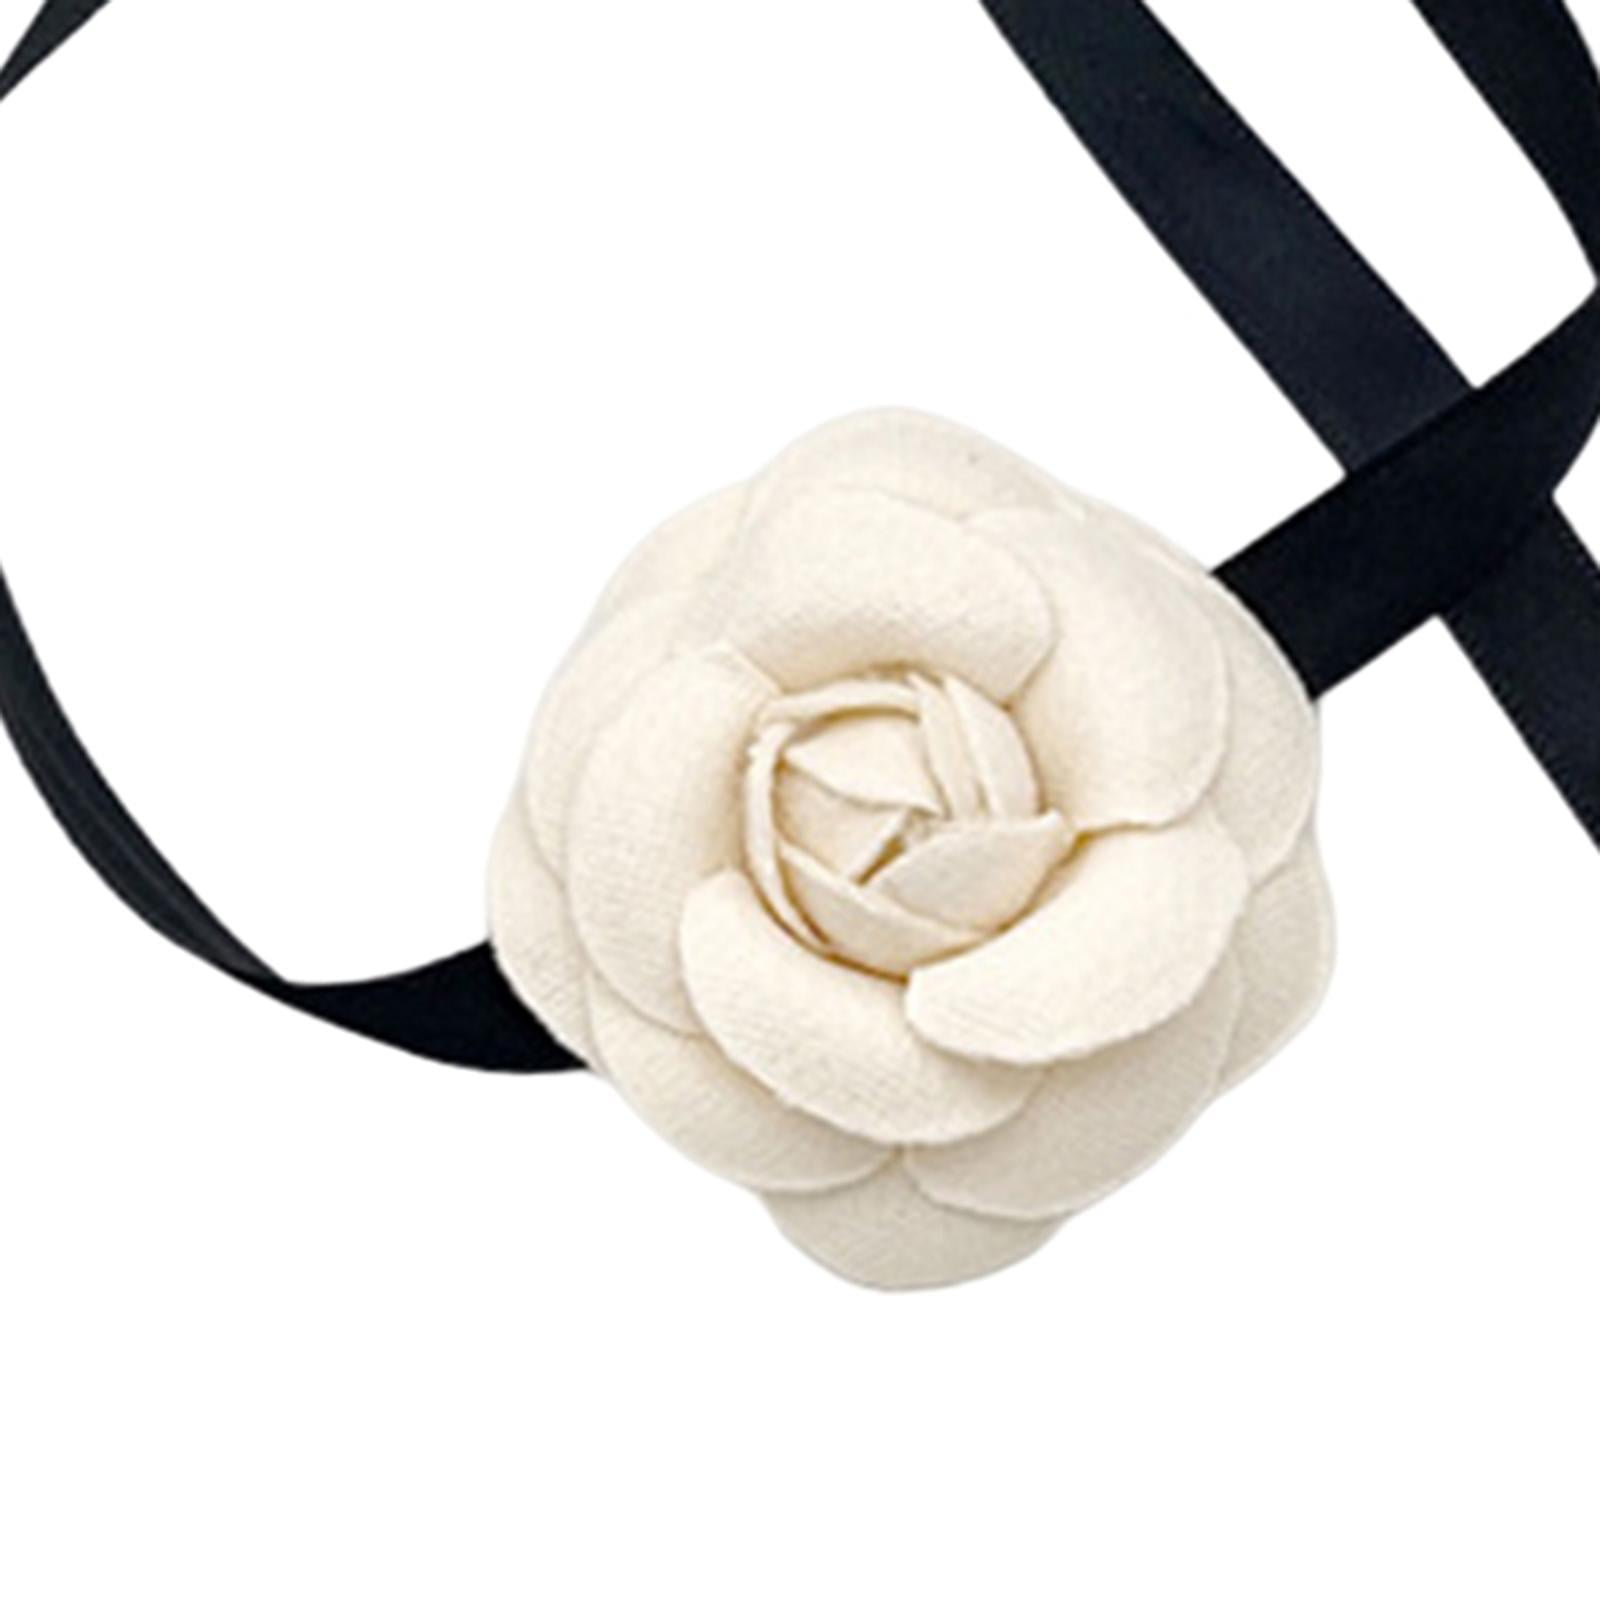  Todu White Choker Camellia Flower Lace-up Necklace